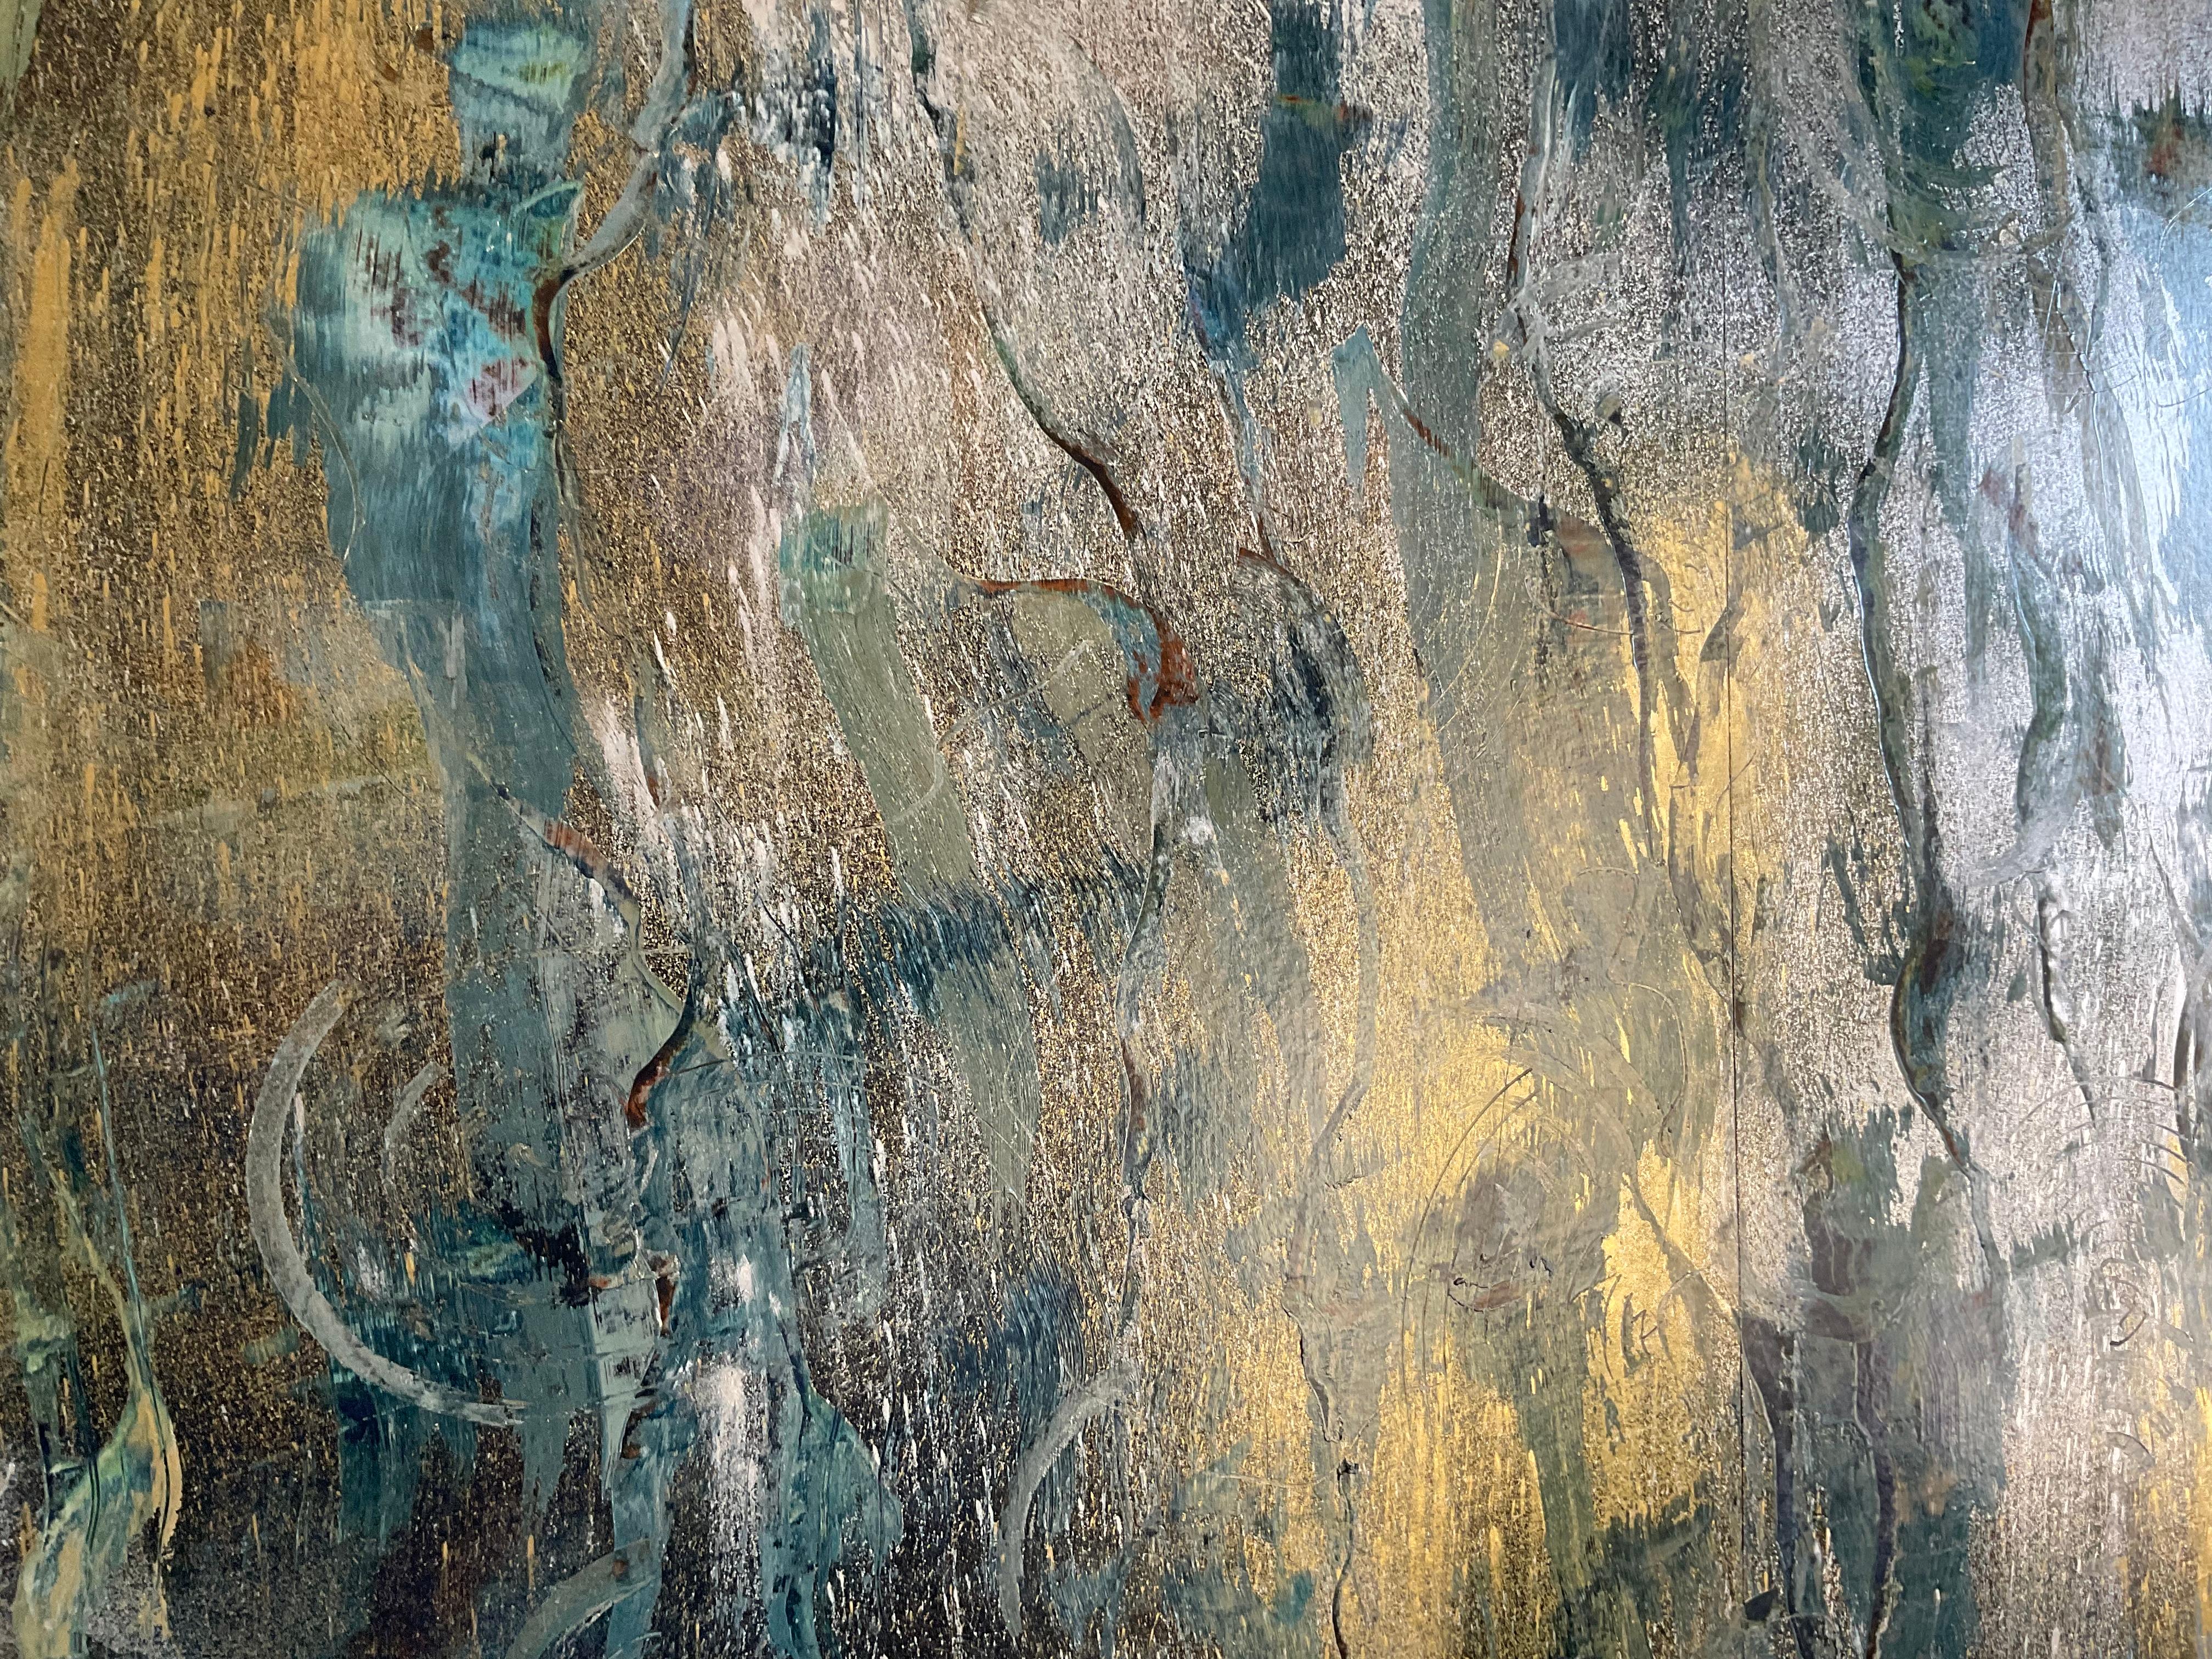 Gestural abstract painting on paper with accents of blue, dark gray, and teal underneath silver and gold metallic powders
